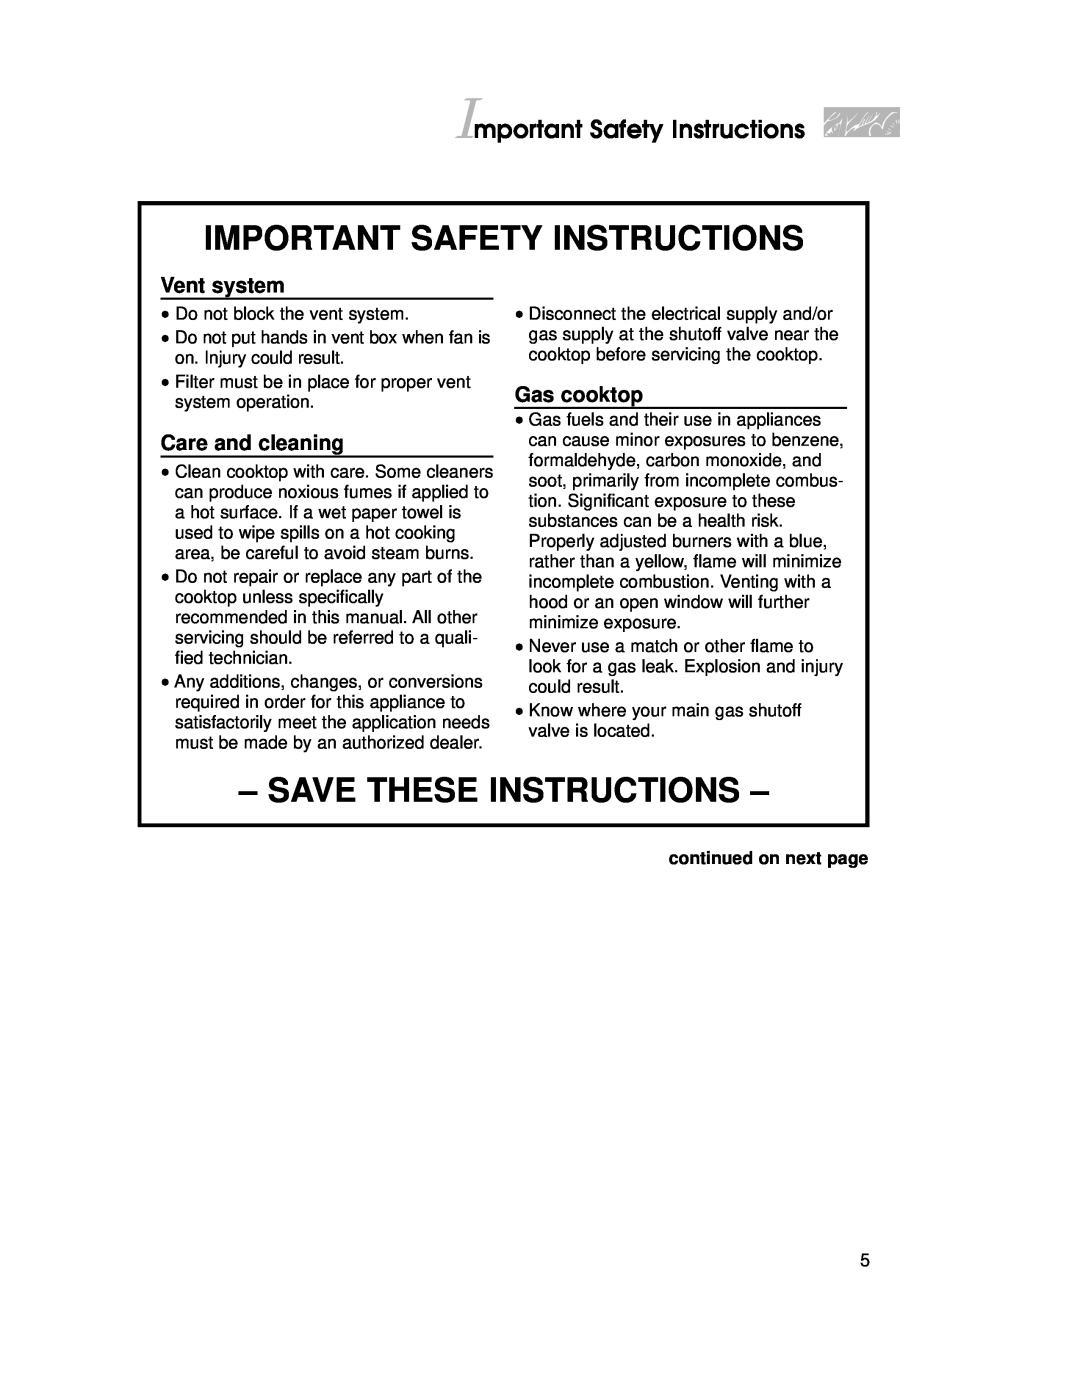 KitchenAid KSVD060B Important Safety Instructions, Save These Instructions, Vent system, Care and cleaning, Gas cooktop 